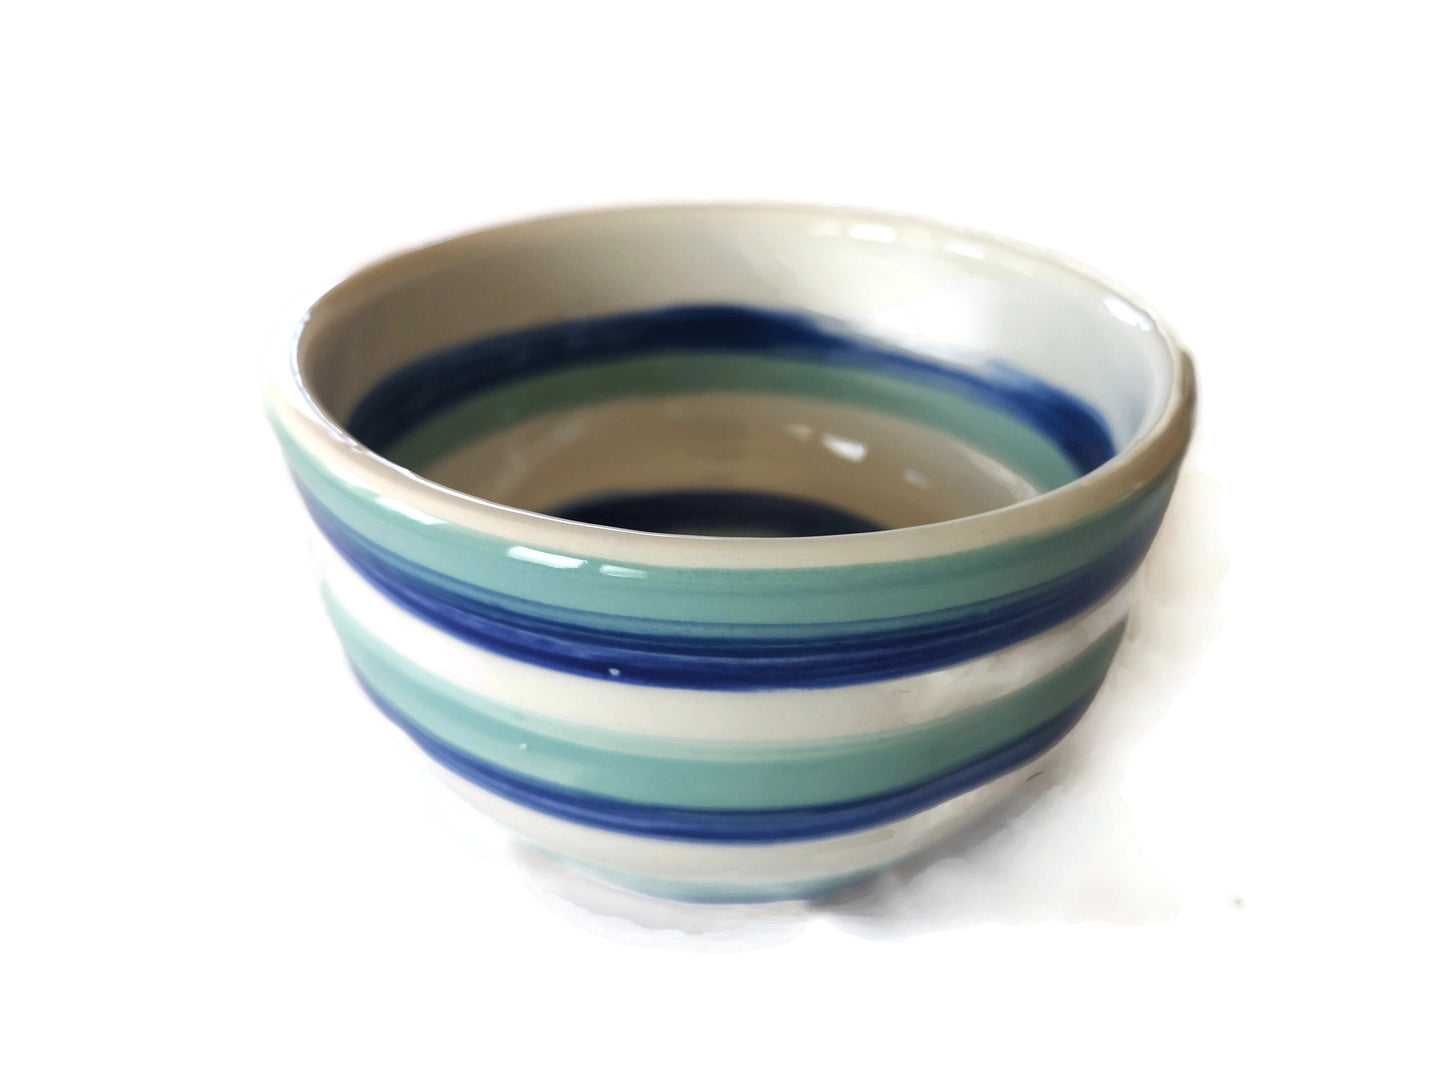 Hand Painted Turquoise Blue Striped Bowl, housewarming gift first home for her, Mom Birthday Gifts From Daughter, Best Sellers Pasta Bowls - Ceramica Ana Rafael